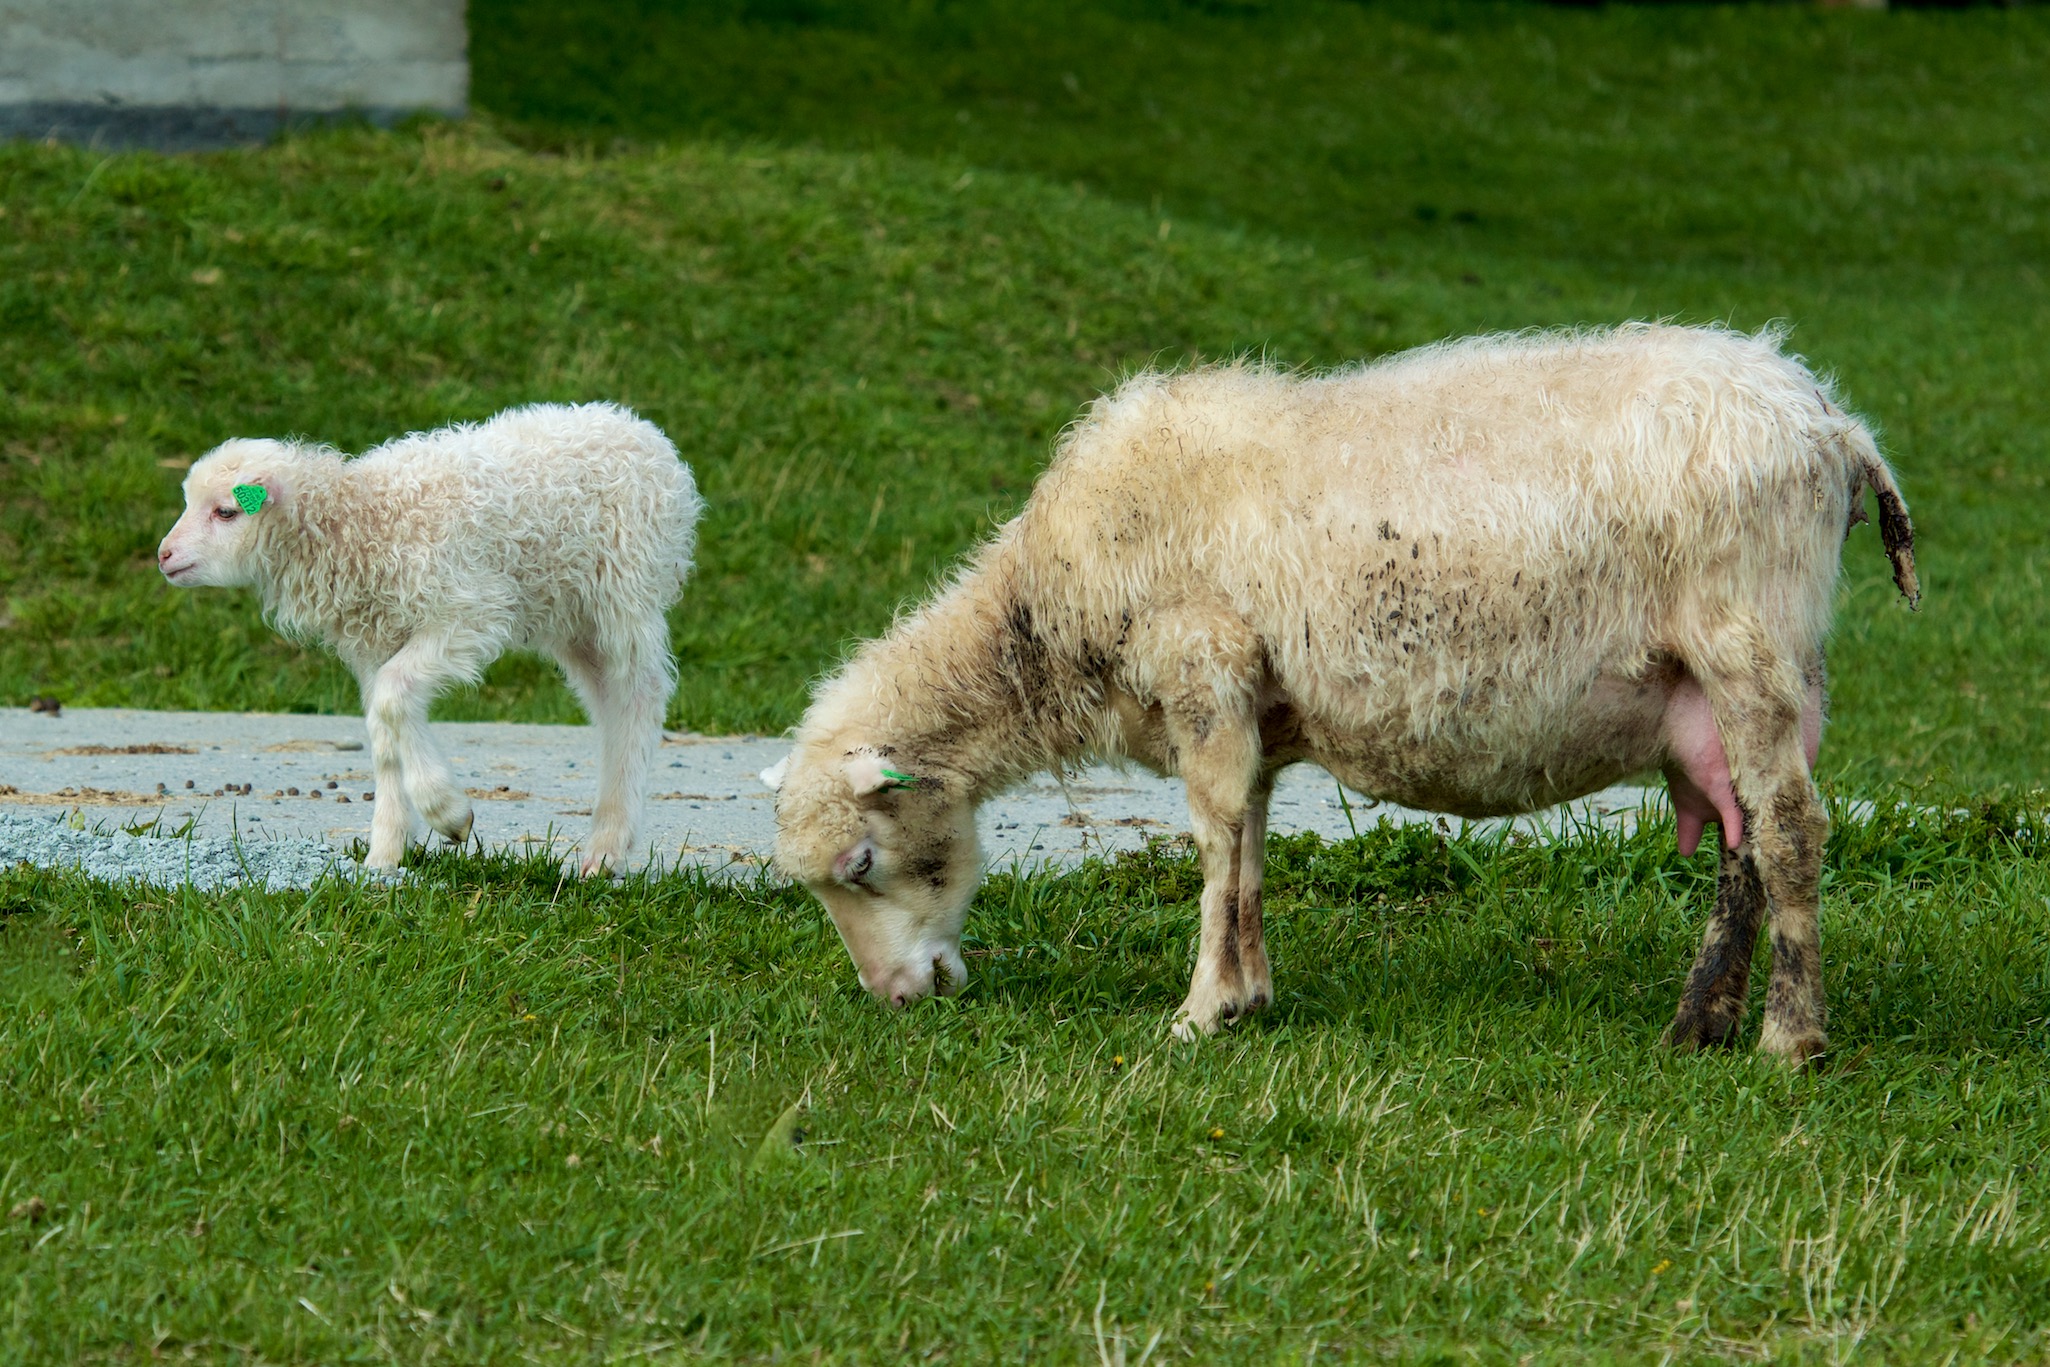 Lamb and Sheep in Oppdal, Norway